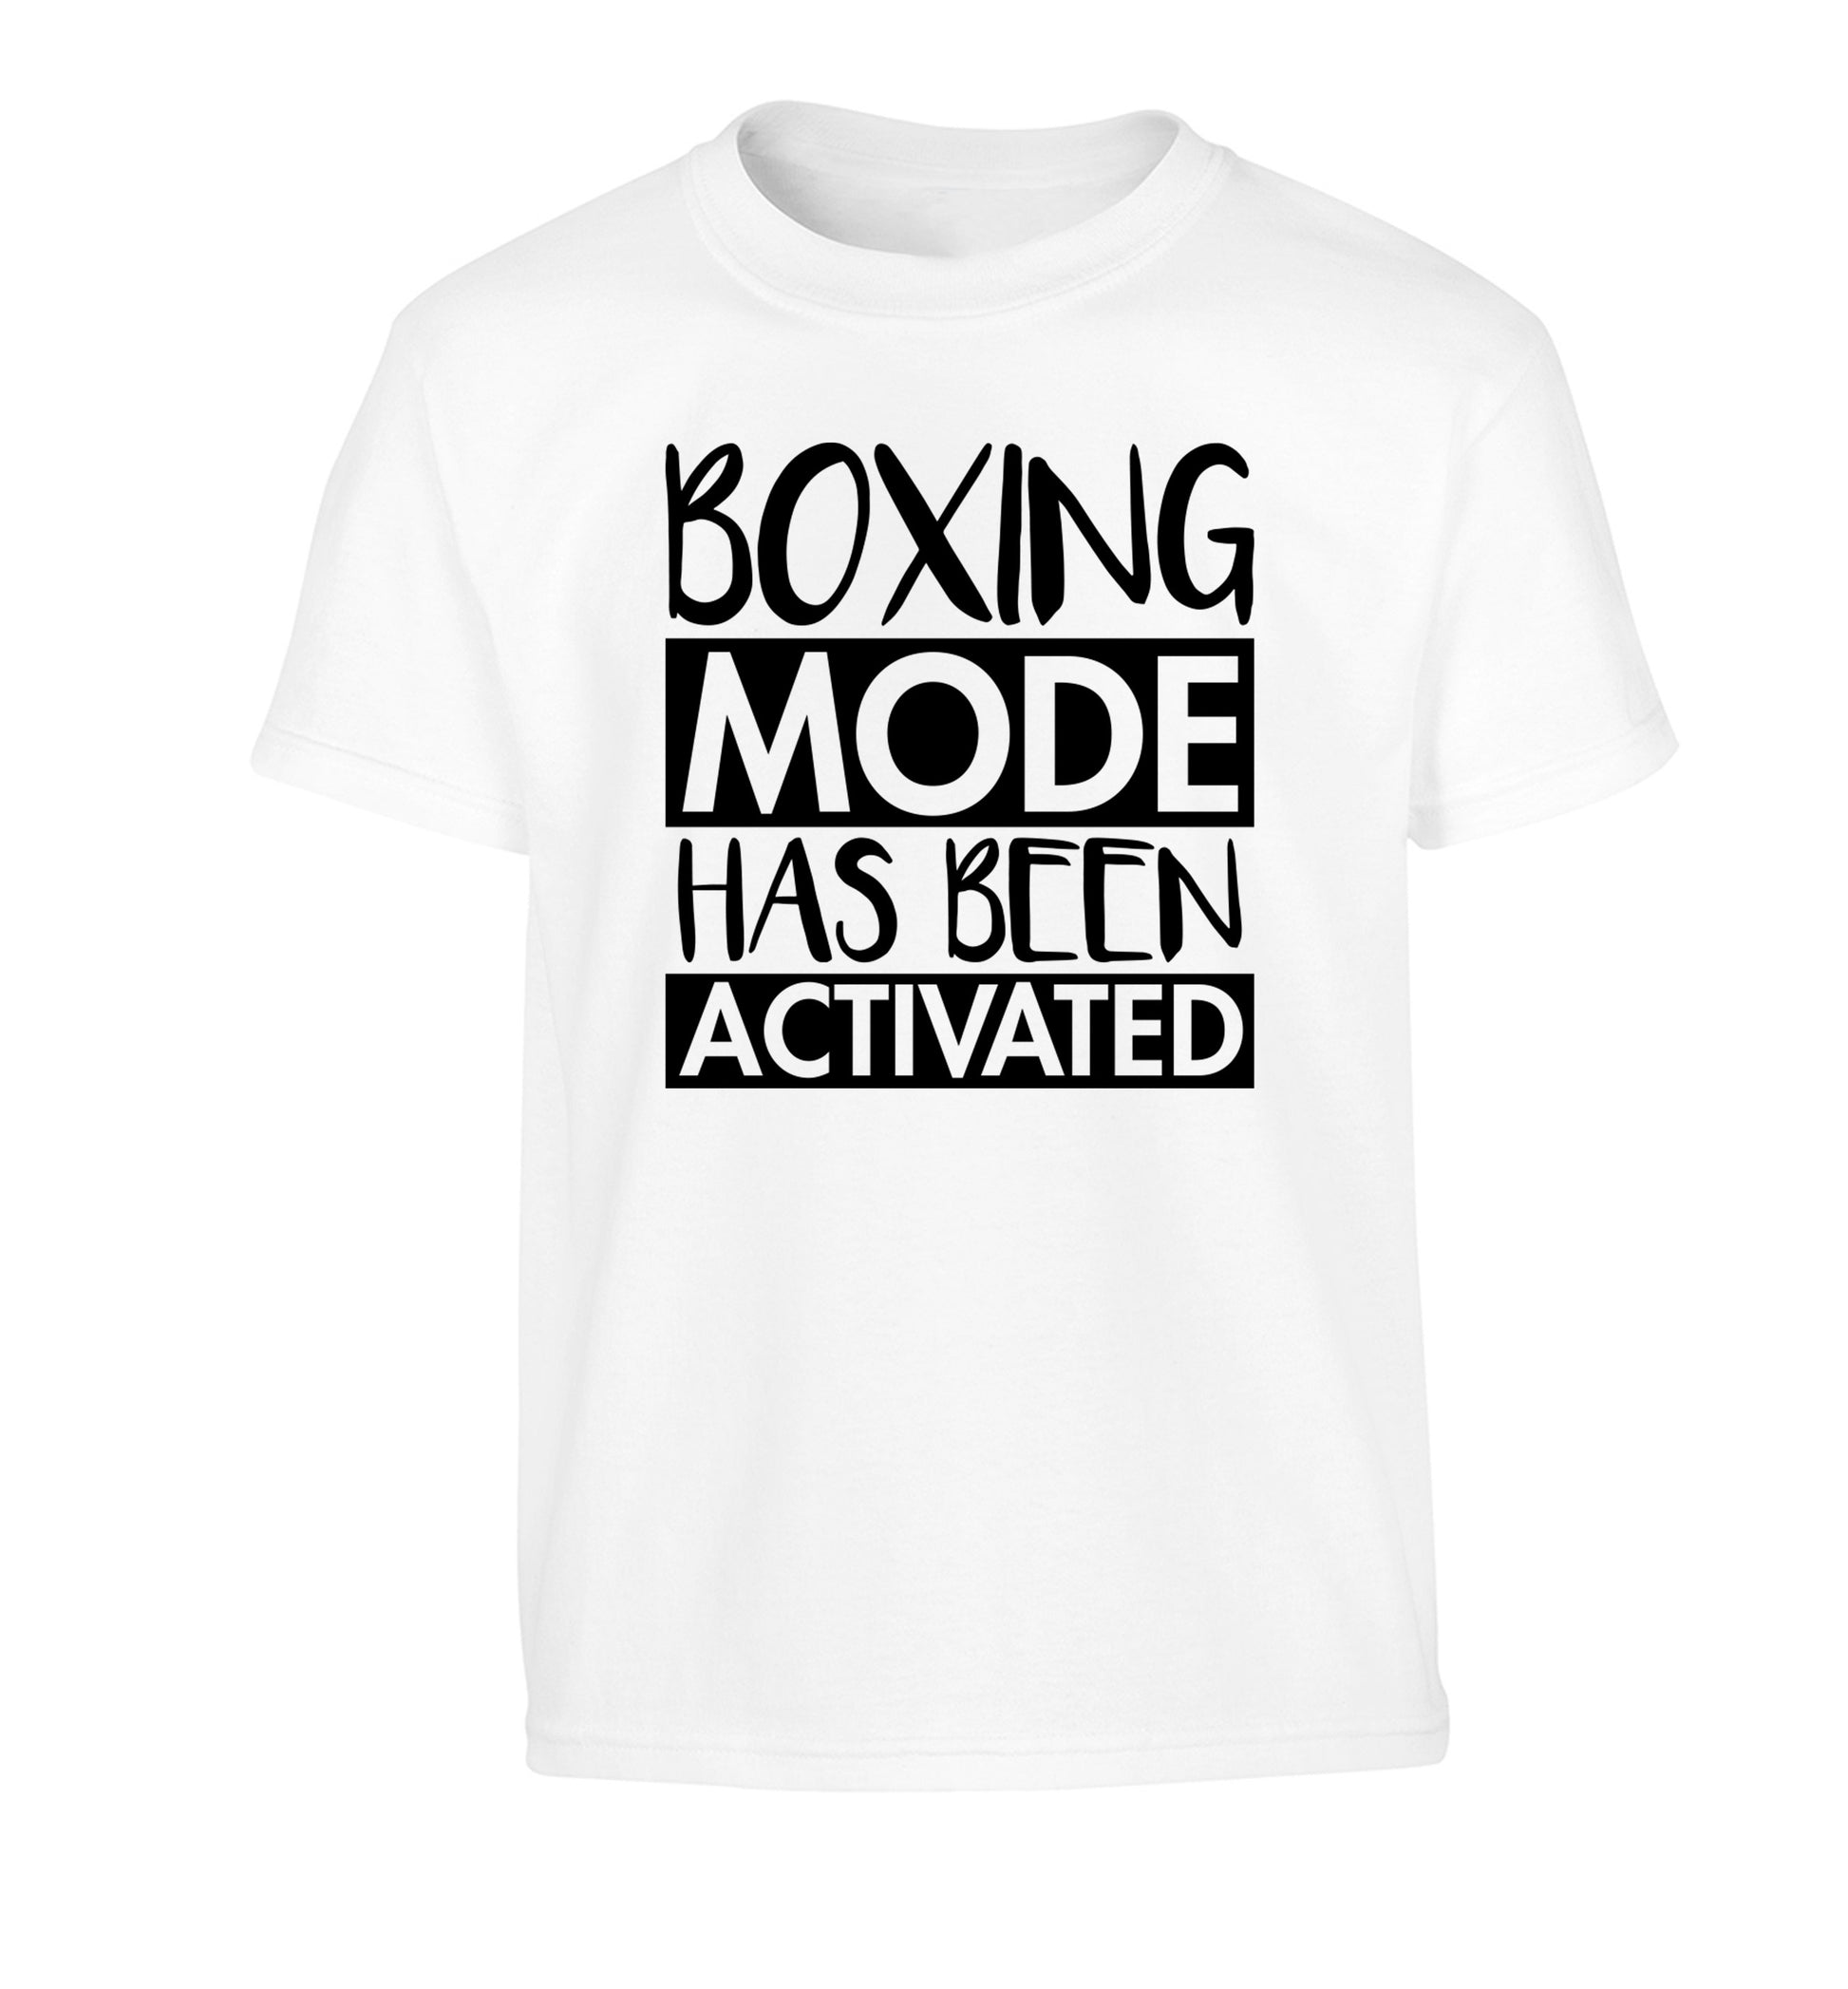 Boxing mode activated Children's white Tshirt 12-14 Years